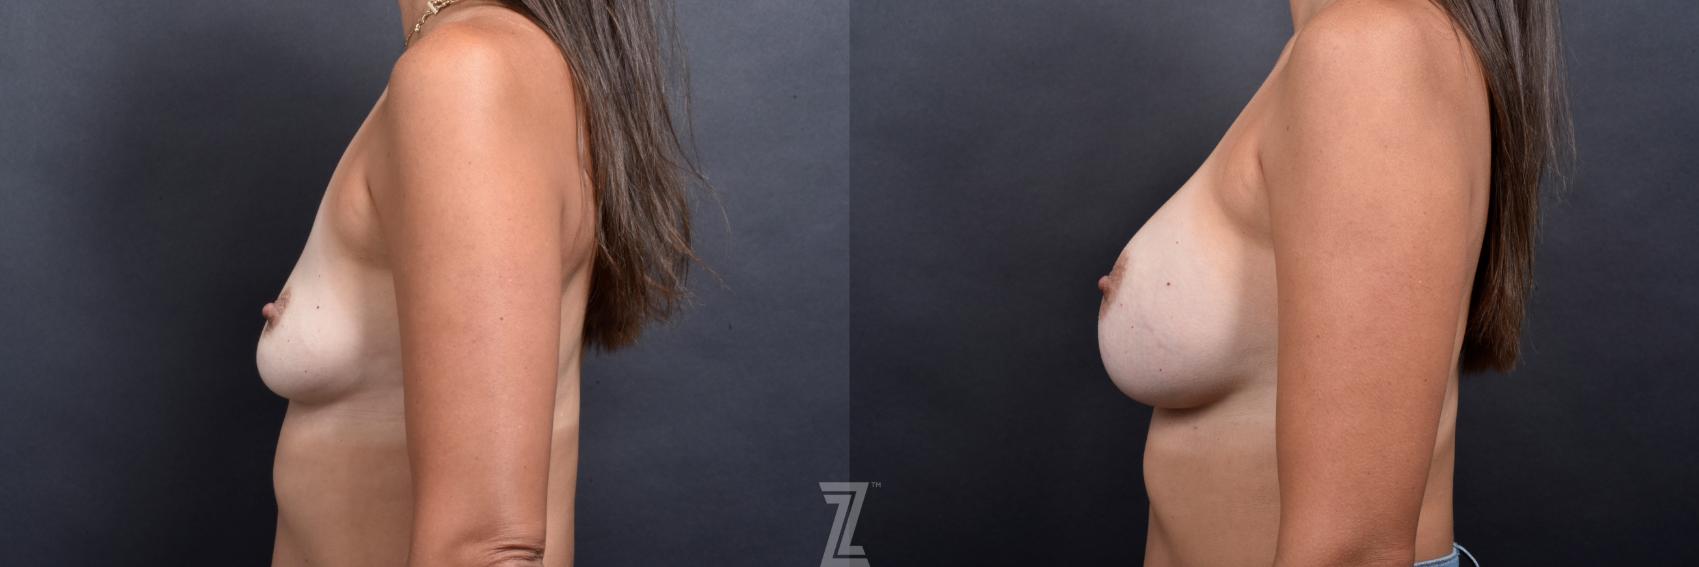 Breast Augmentation Before & After Photo | Austin, TX | The Piazza Center for Plastic Surgery & Advanced Skin Care